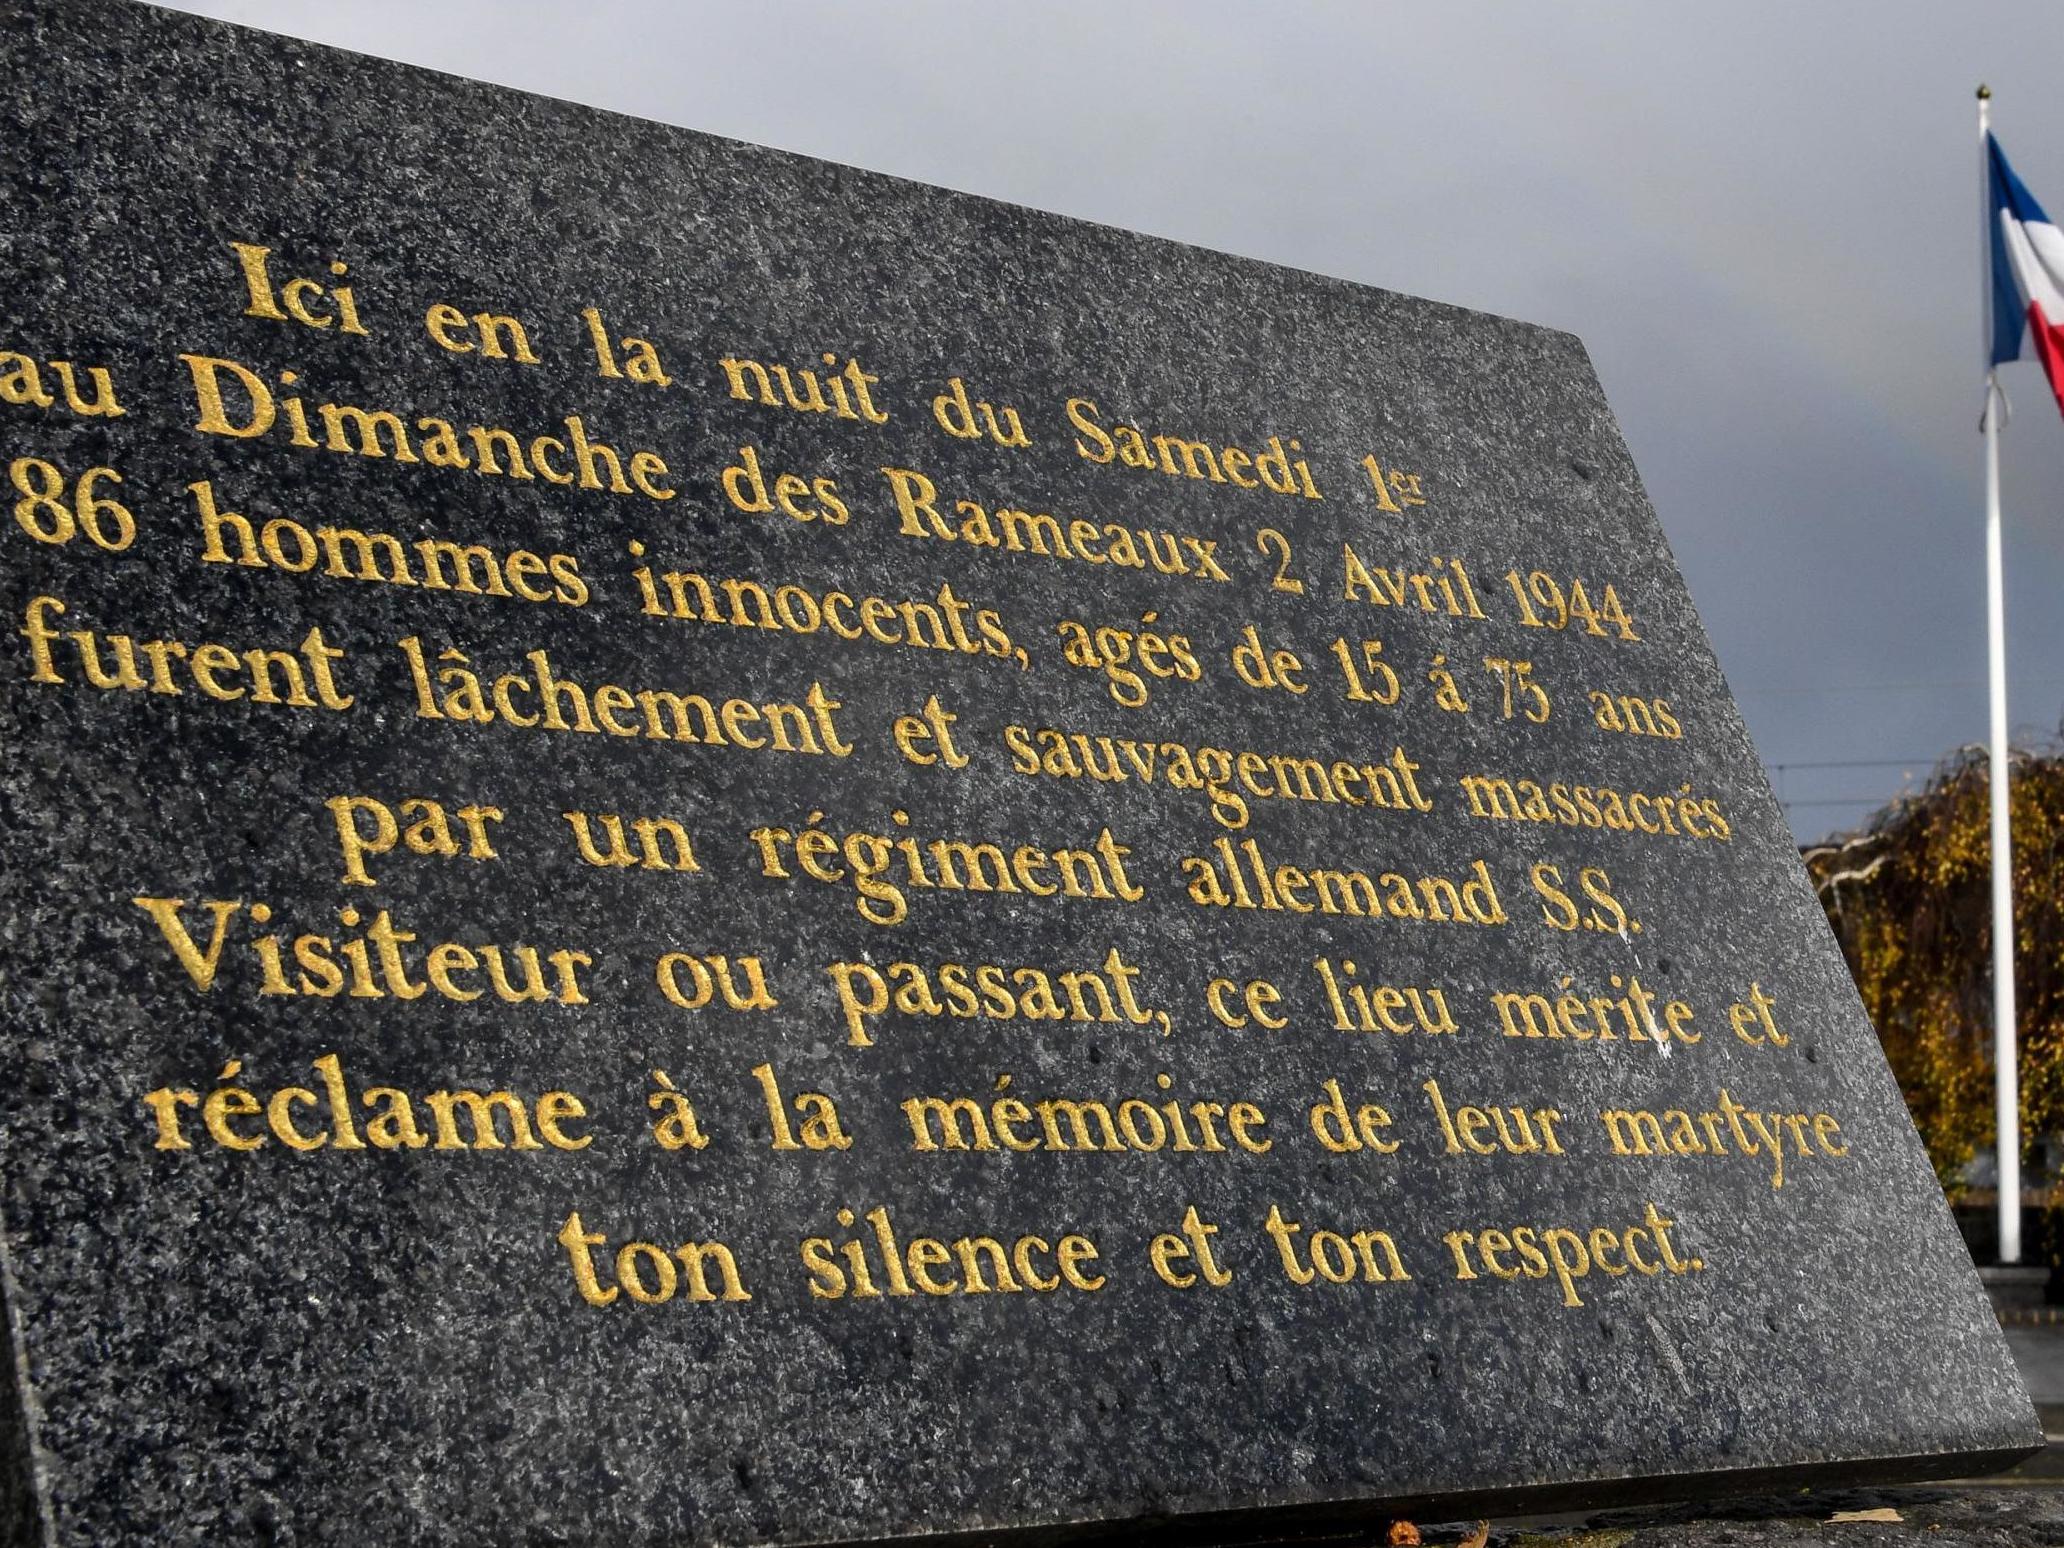 A commemorative plaque in Ascq, northern France, reminding of the 2 April, 1944, massacre of 86 civilians by an SS regiment